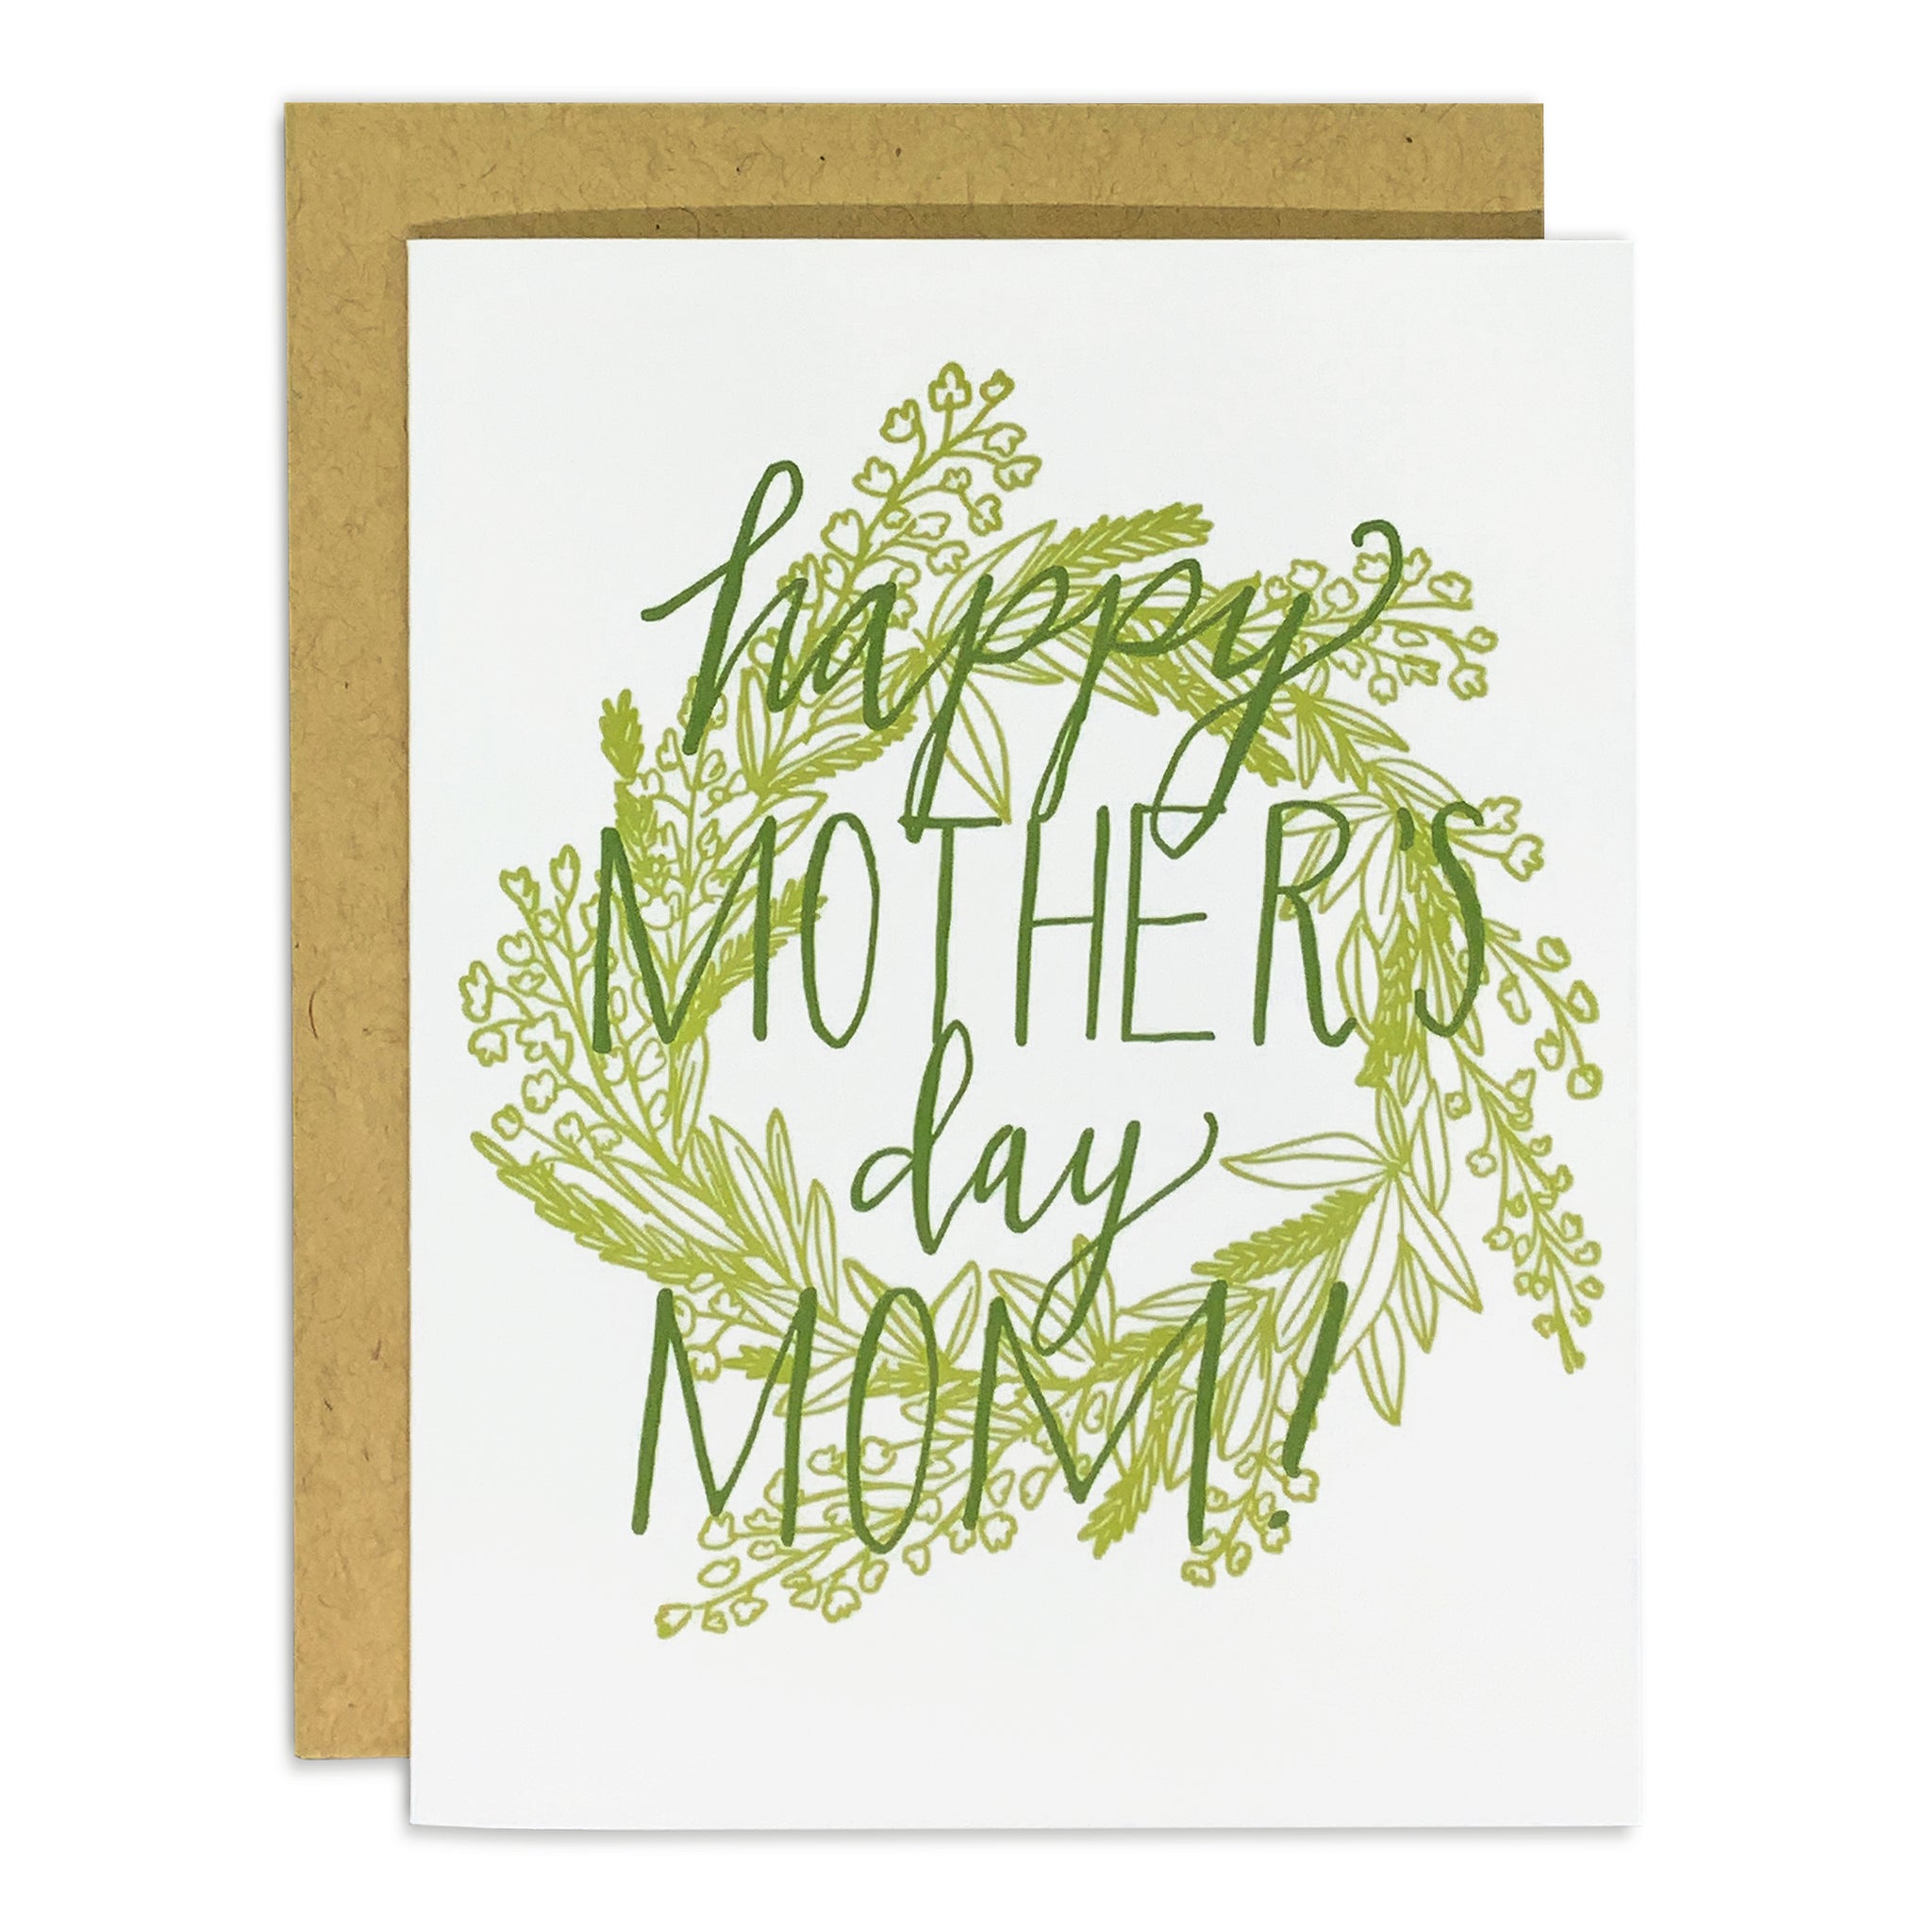 Happy Mother's Day Mom! Card